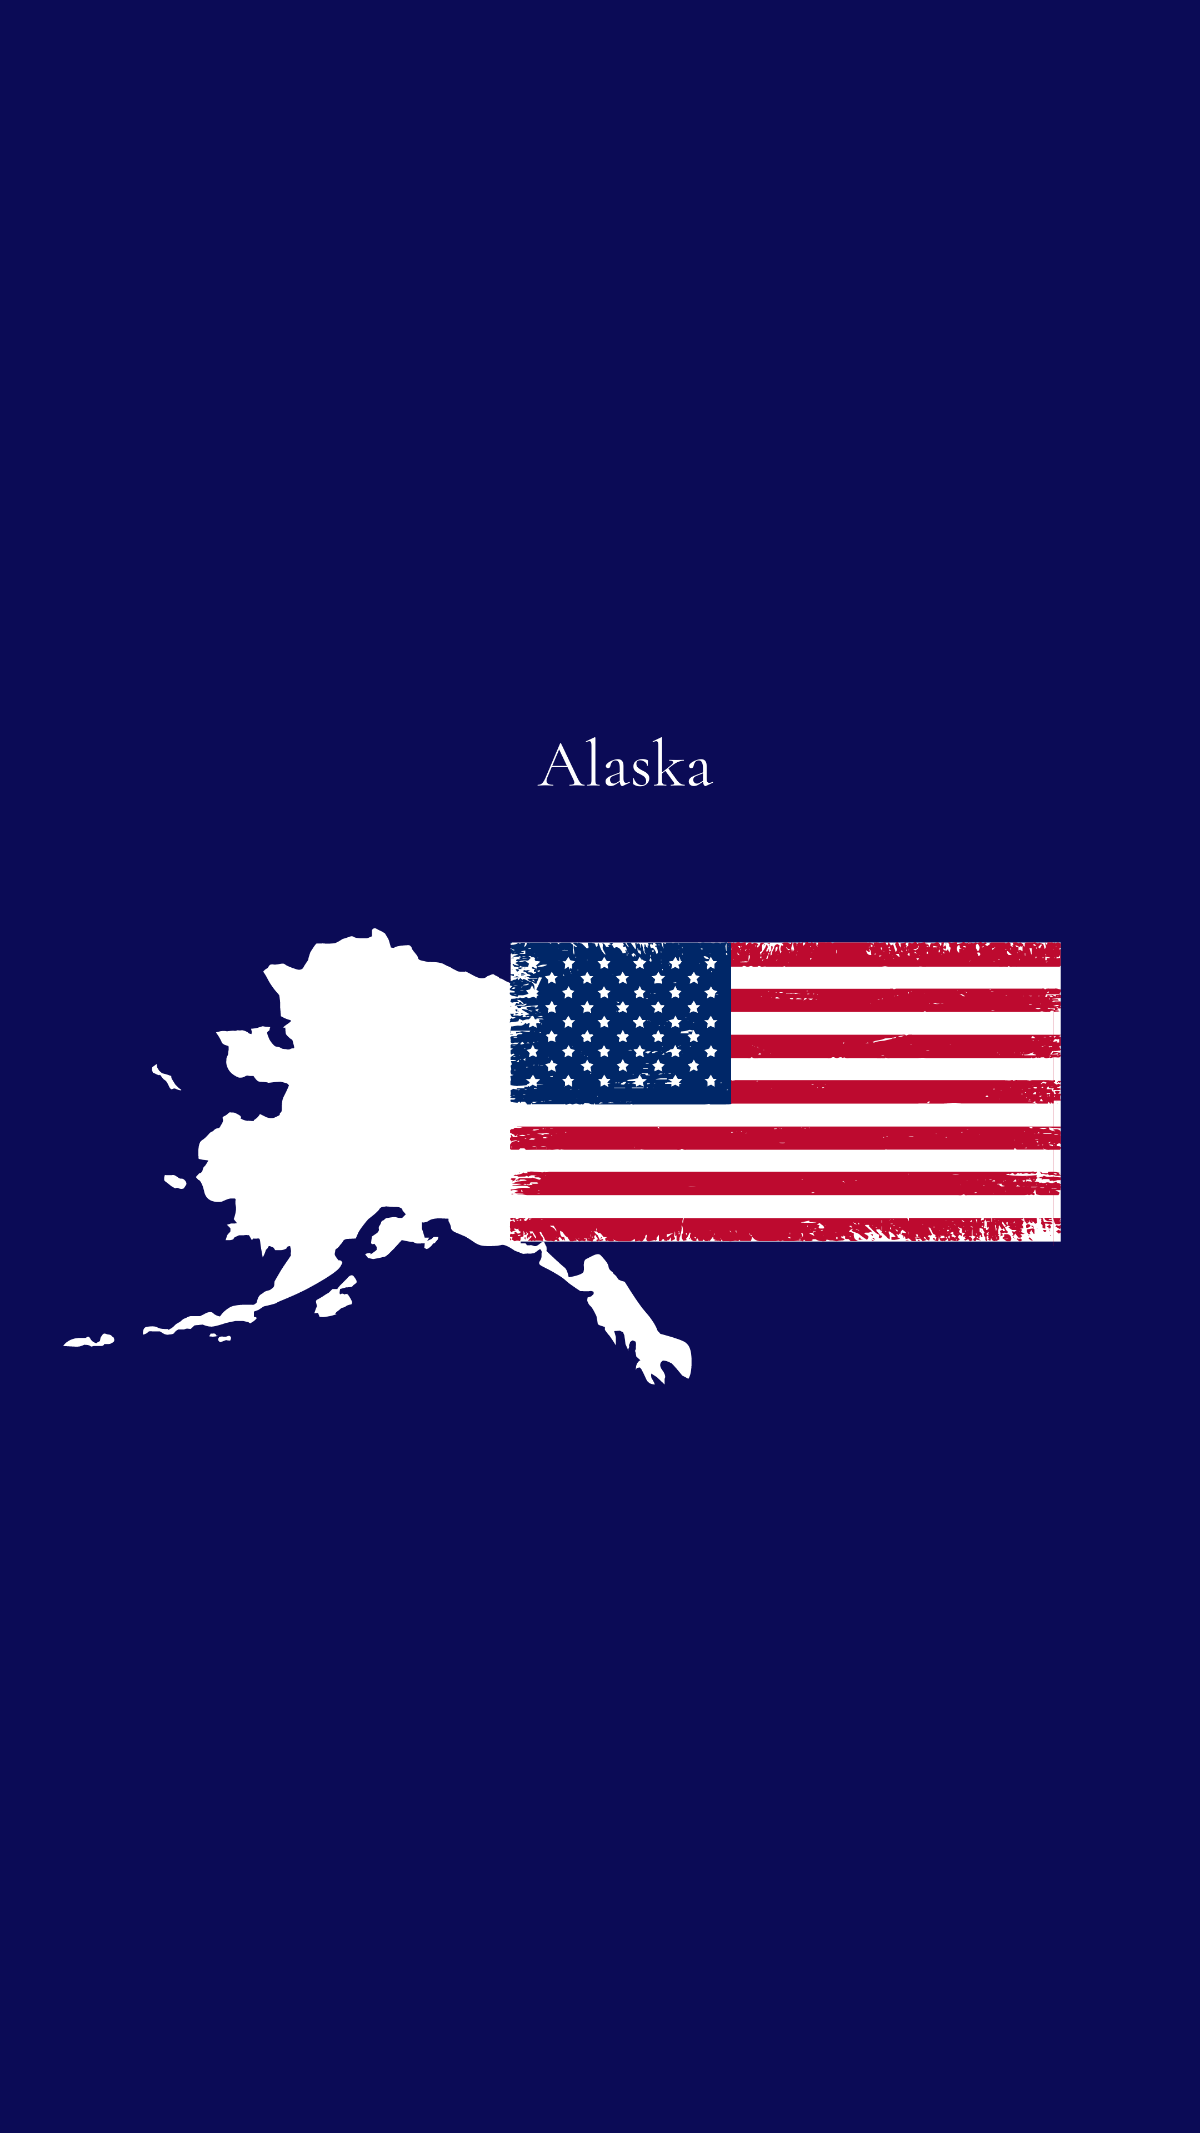 Free Alaska Day iPhone Background Template